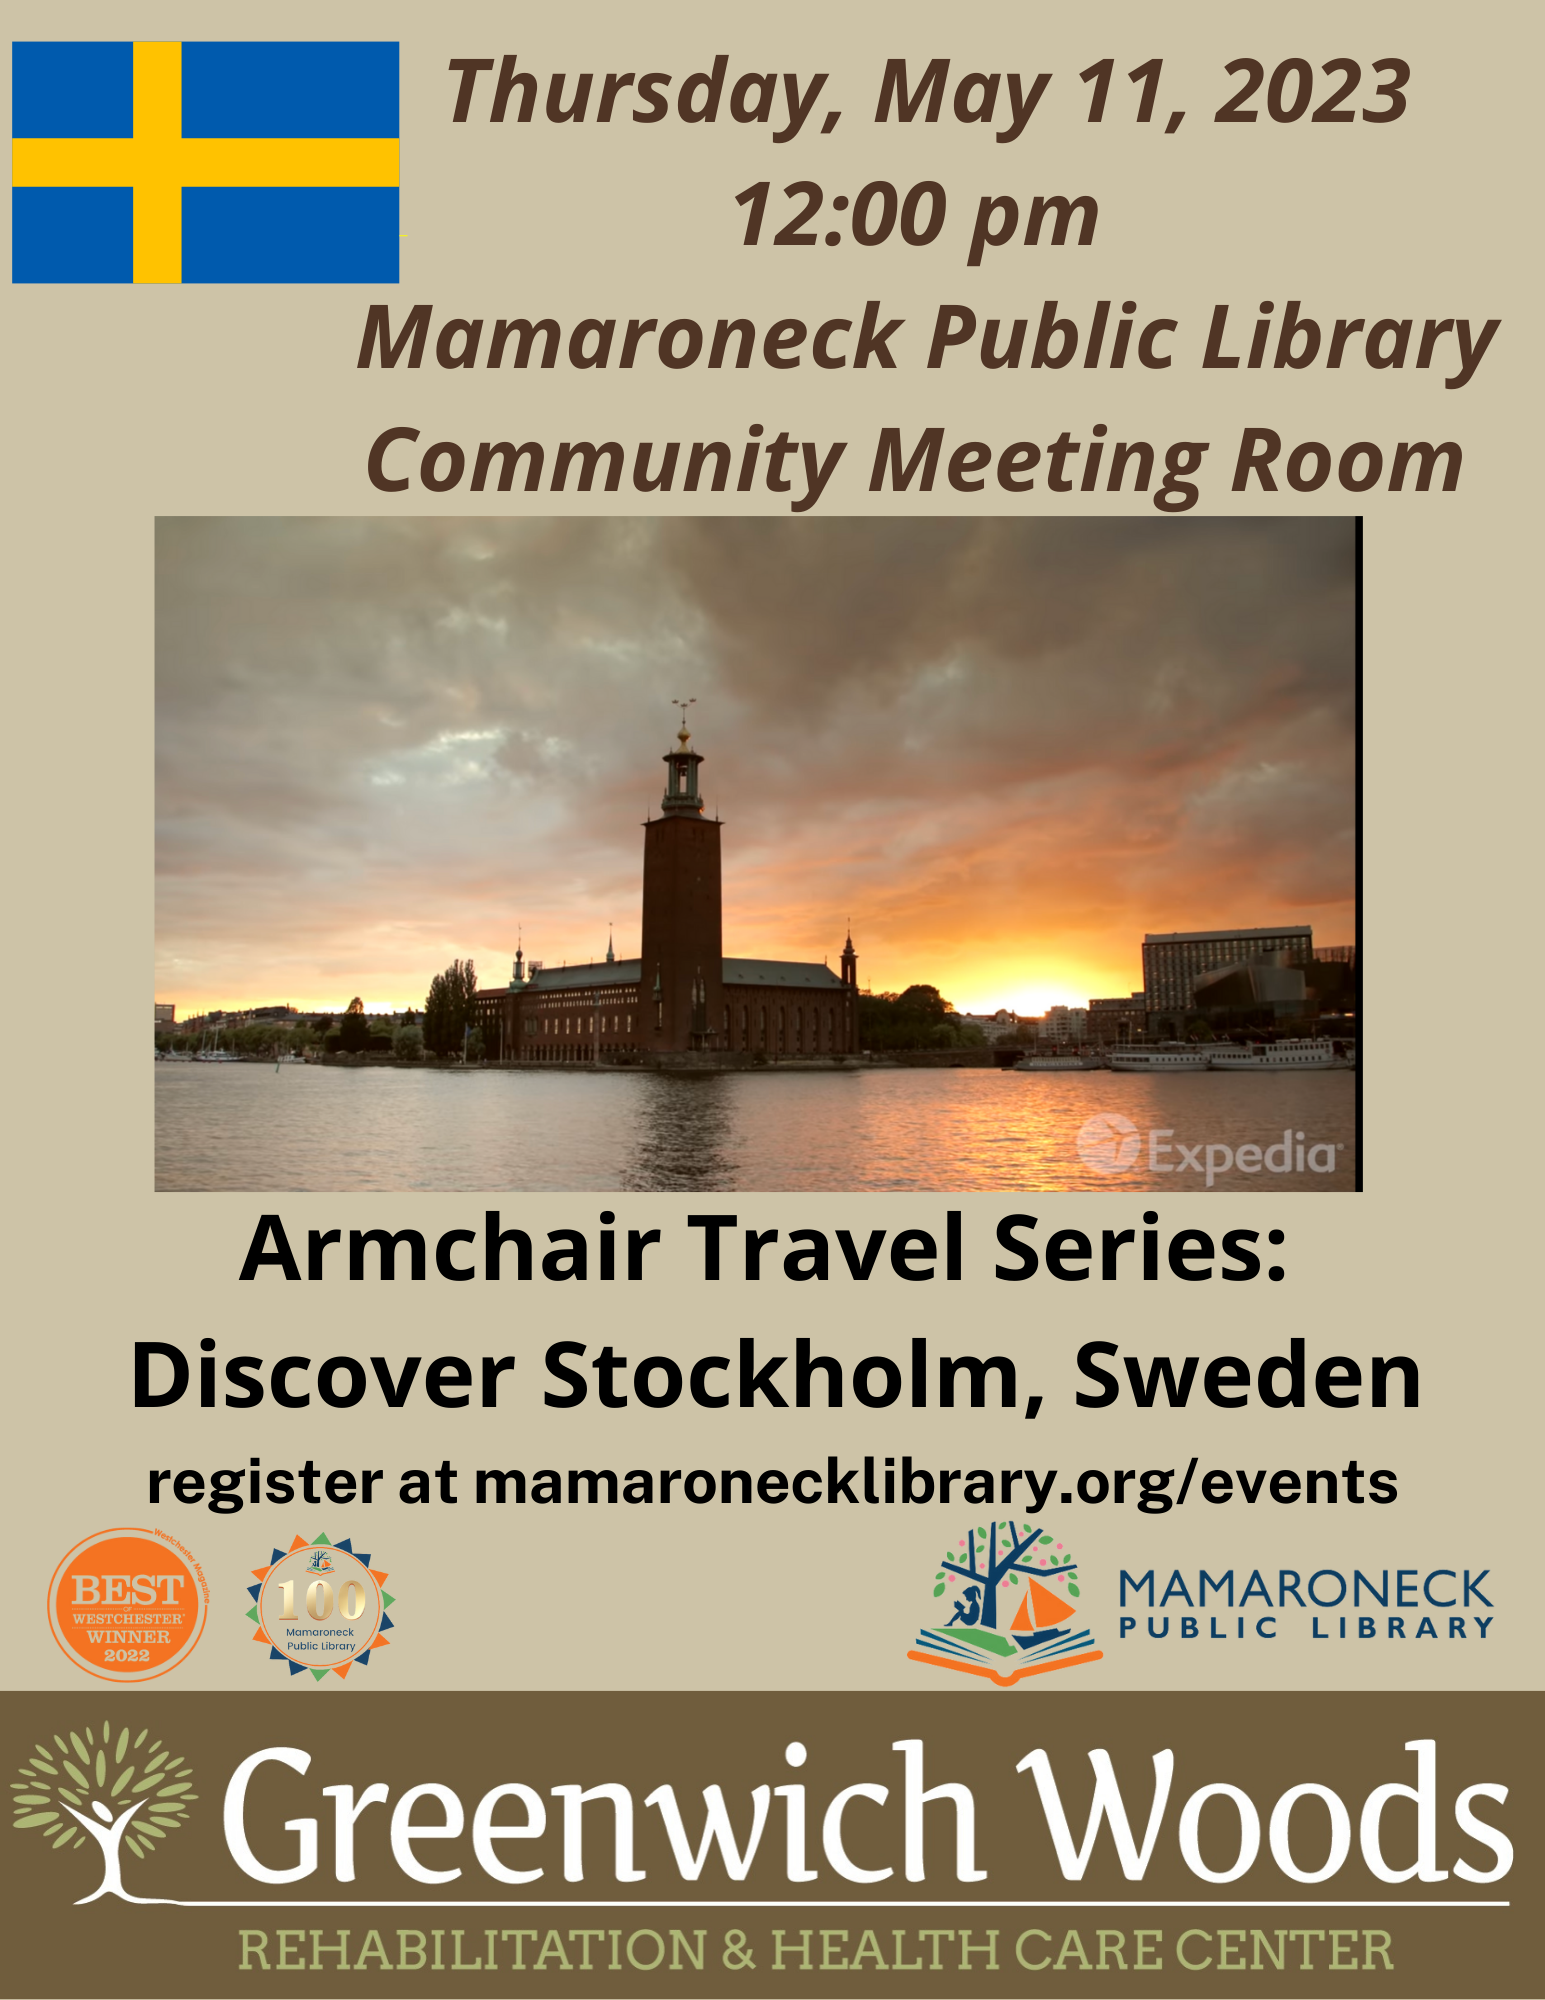 Armchair Travel Series - discover Stockholm Sweden - 5/11 @ Noon - community room